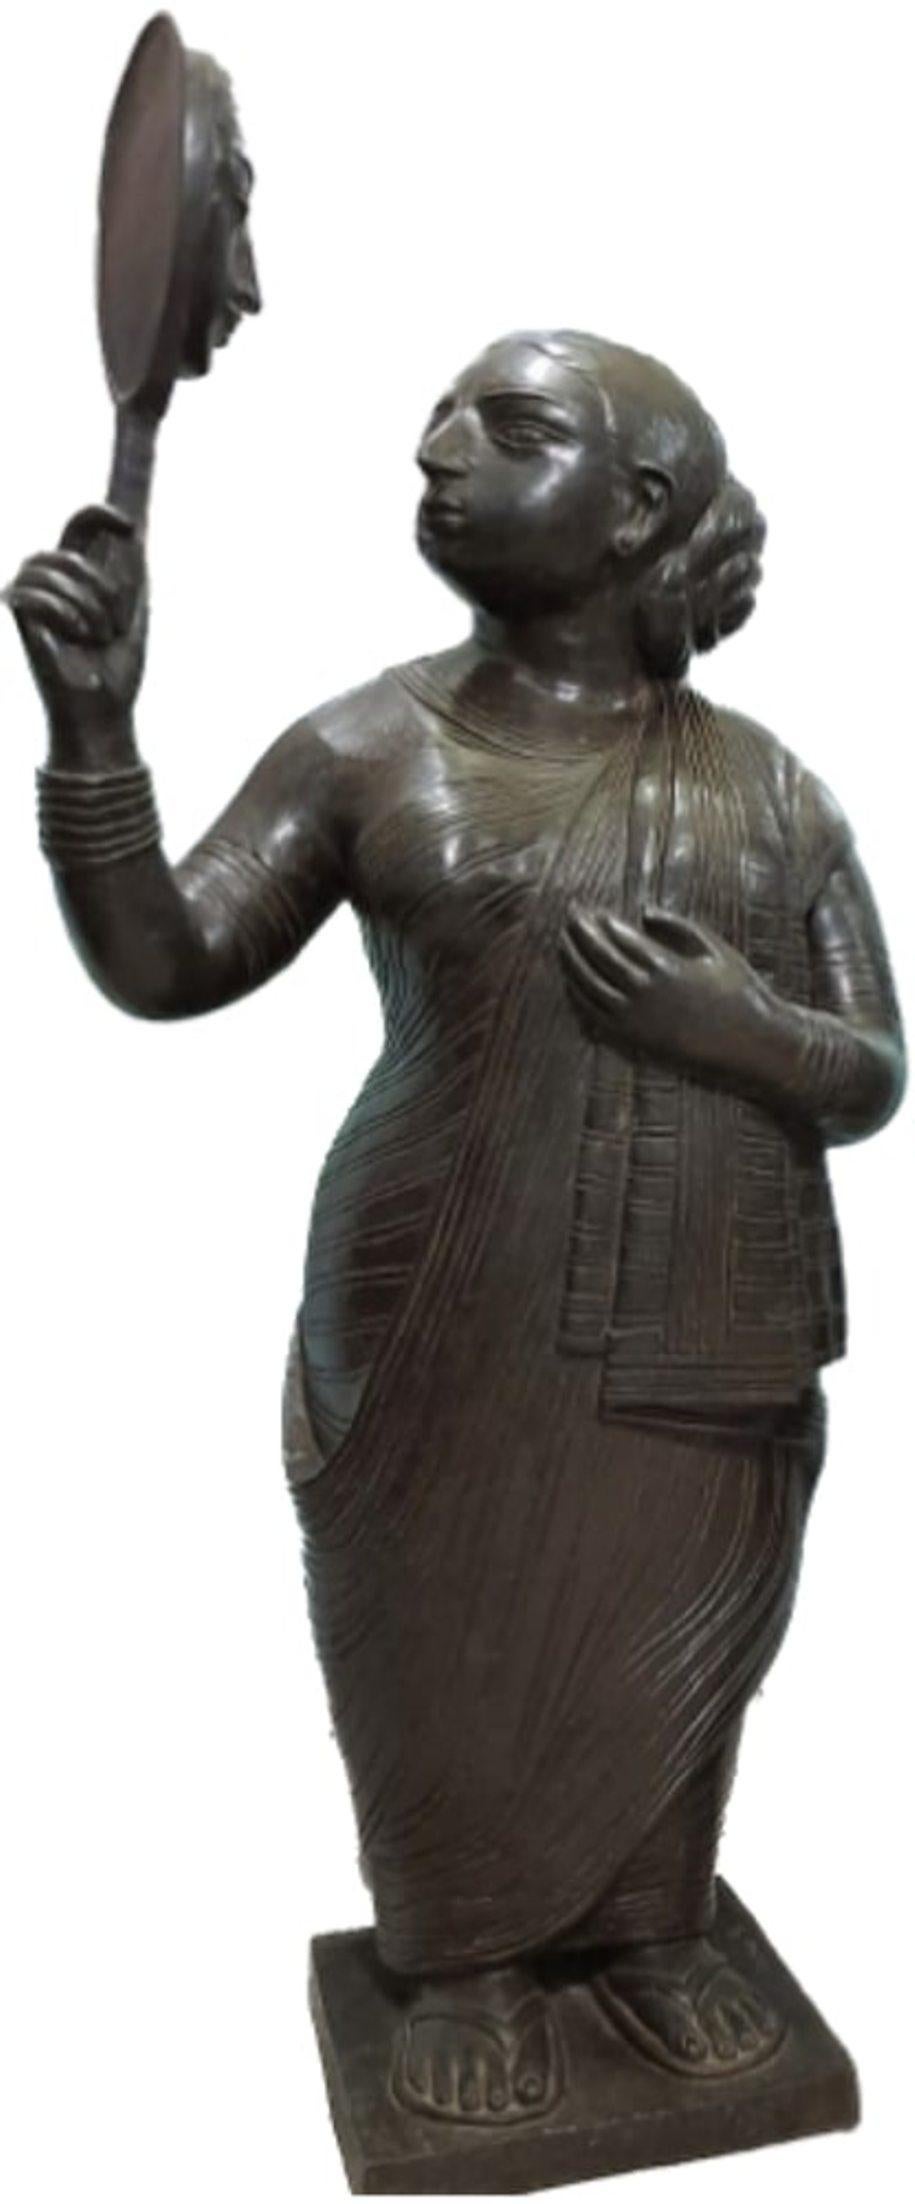 Lalu Prasad Shaw - Babuana - 44 x 23 x 16 inches
Bronze, Edition-3/5.

Style : Known widely for his highly stylized portraits of Bengali women and couples, Lalu Prasad Shaw’s works lay the most emphasis on his subject’s physical characteristics.